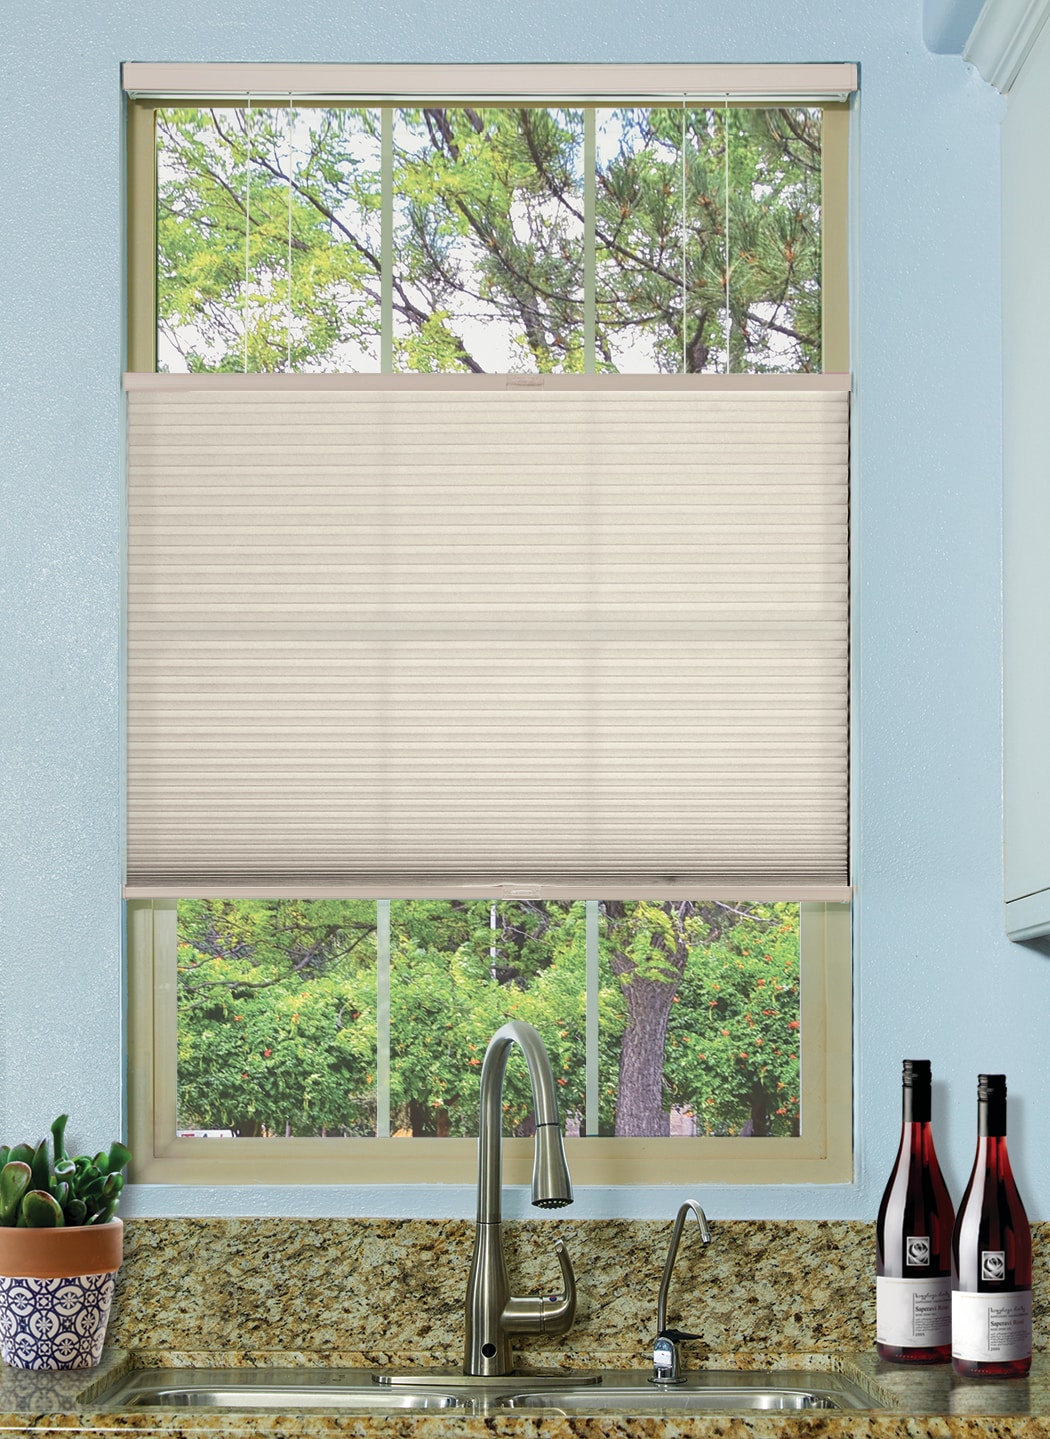 Persilux Solar Roller Shades Light Filtering Window Blinds (28 W x 72 H,  Grey) Flame Retardant, UV Protection Sheer Blinds for Windows Shades for Windows  Indoor, Home, Easy to Install 